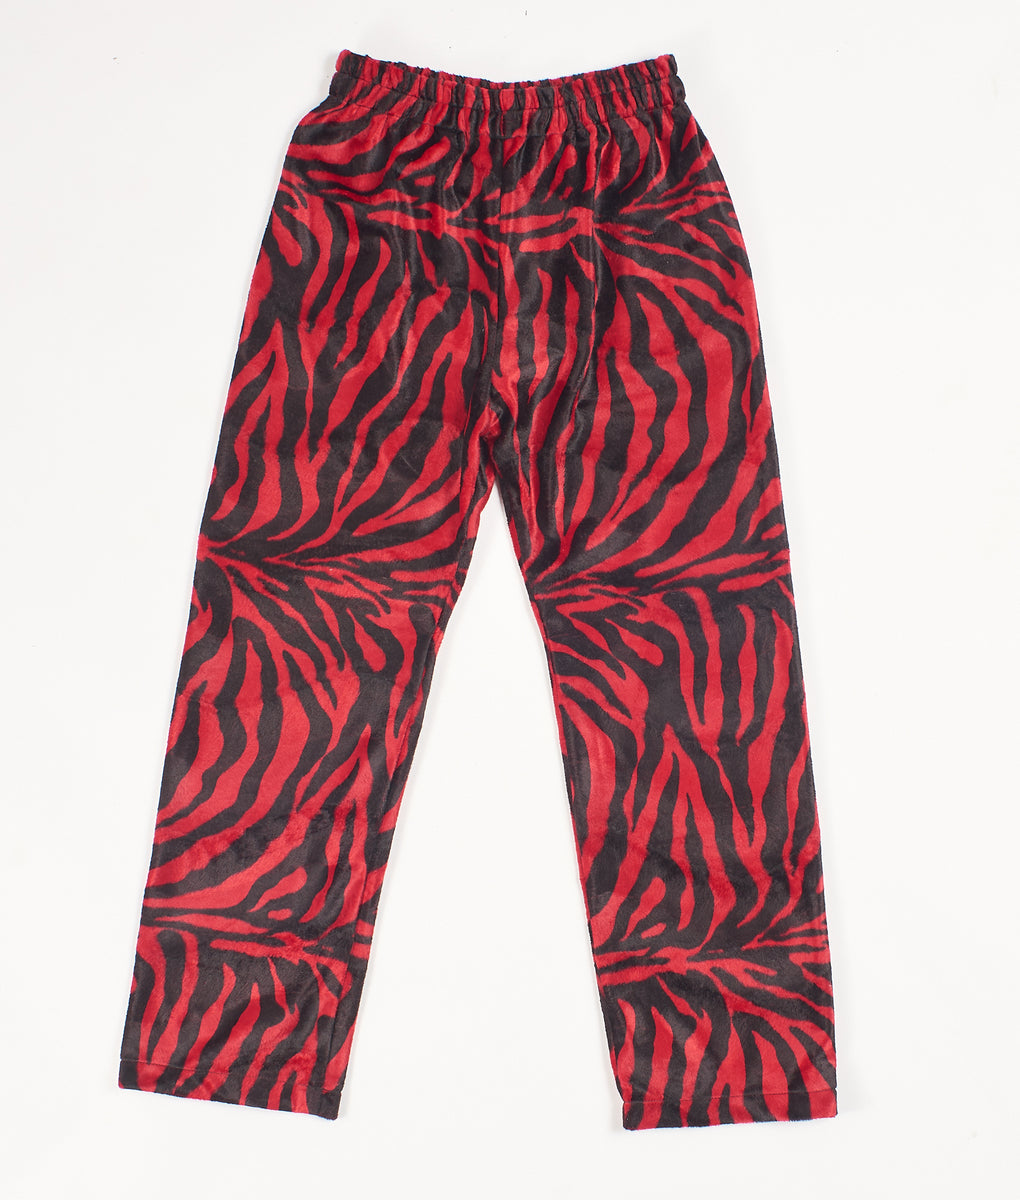 RED ZEBRA PARTY PANTS